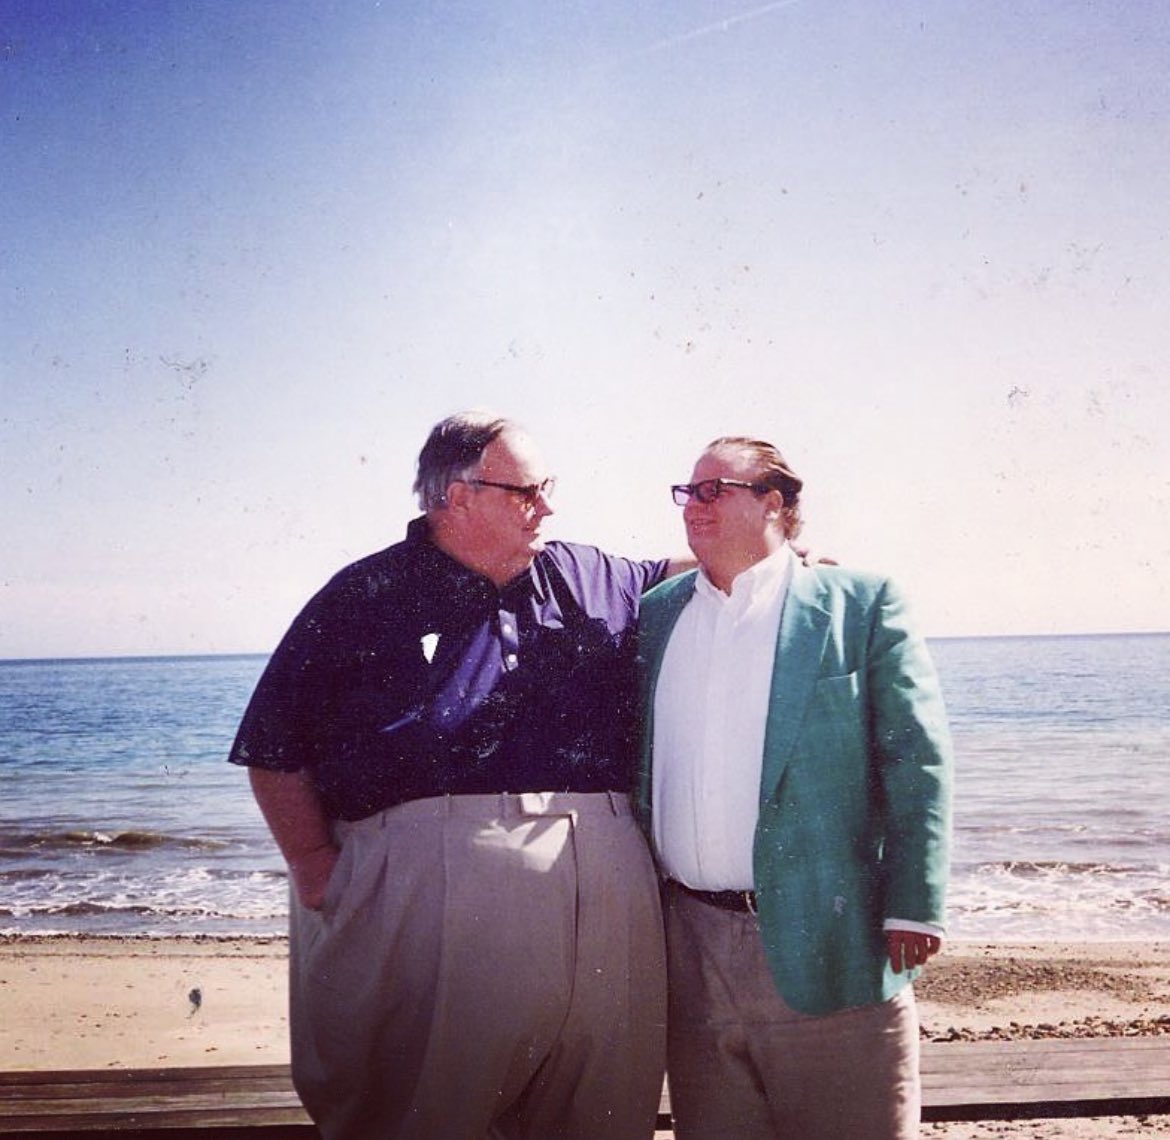 In the 1990s, Chris Farley and his father spent time together at the beach on Lake Michigan. According to Chris's older brother Tom's written account, their father epitomized unwavering affection when it came to Chris. However, assisting Chris in his struggles proved to be a…